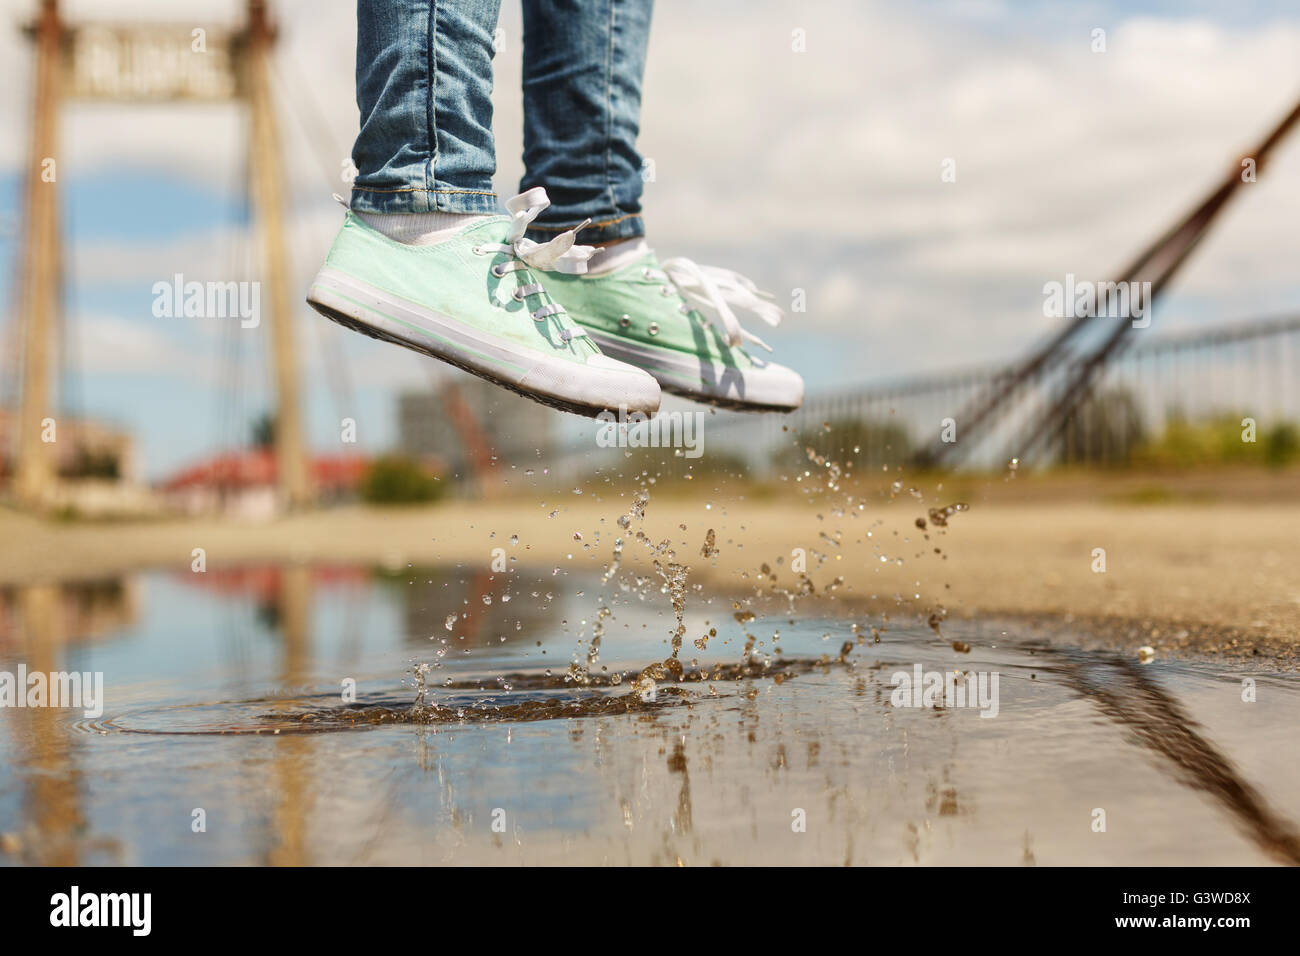 Foots of a woman in a sport shoes flying over a puddle during jumping. Close up shot of foots over the water Stock Photo